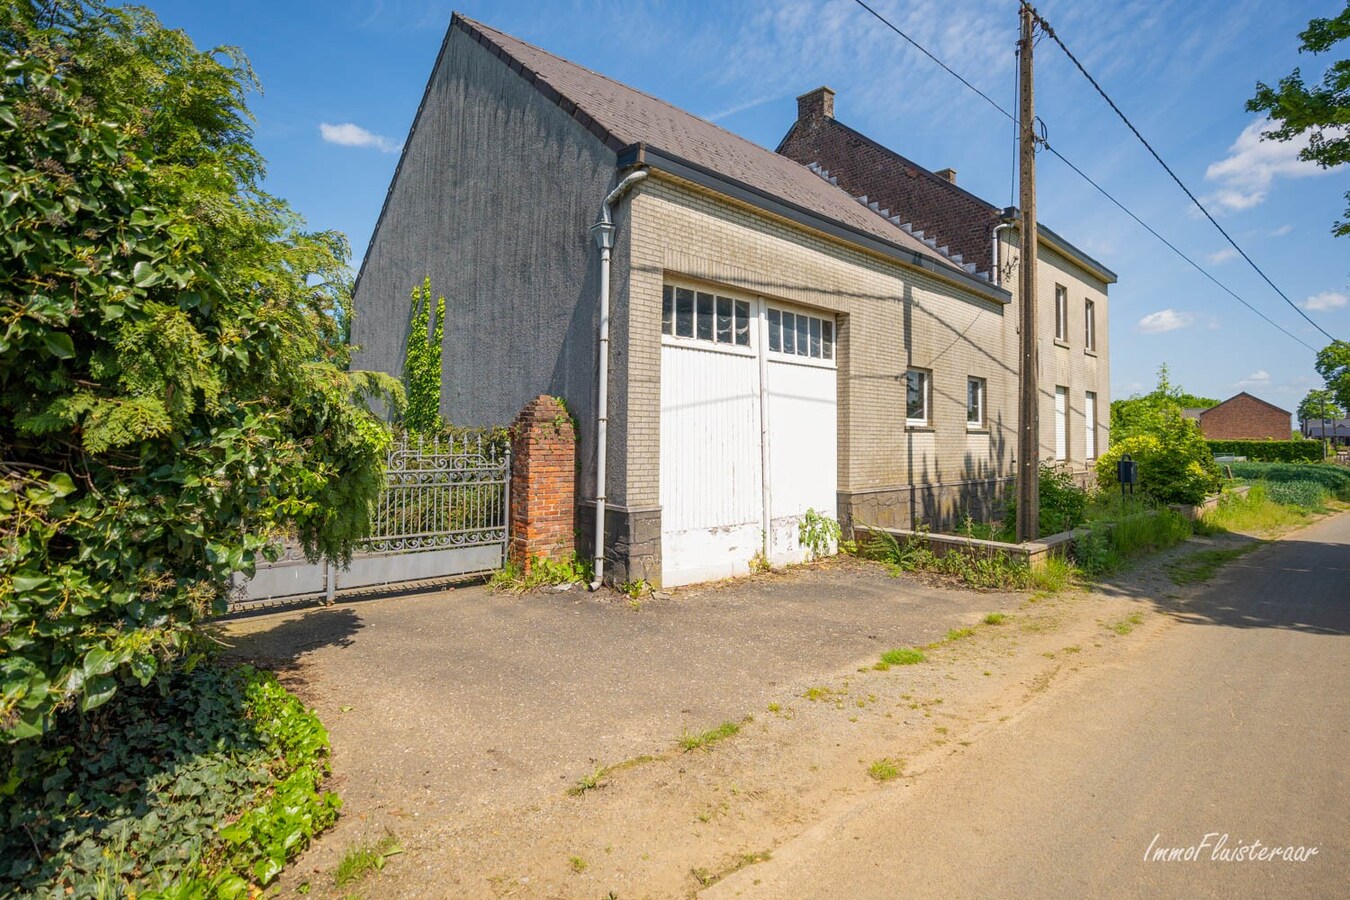 Property for sale |  with option - with restrictions in Bekkevoort